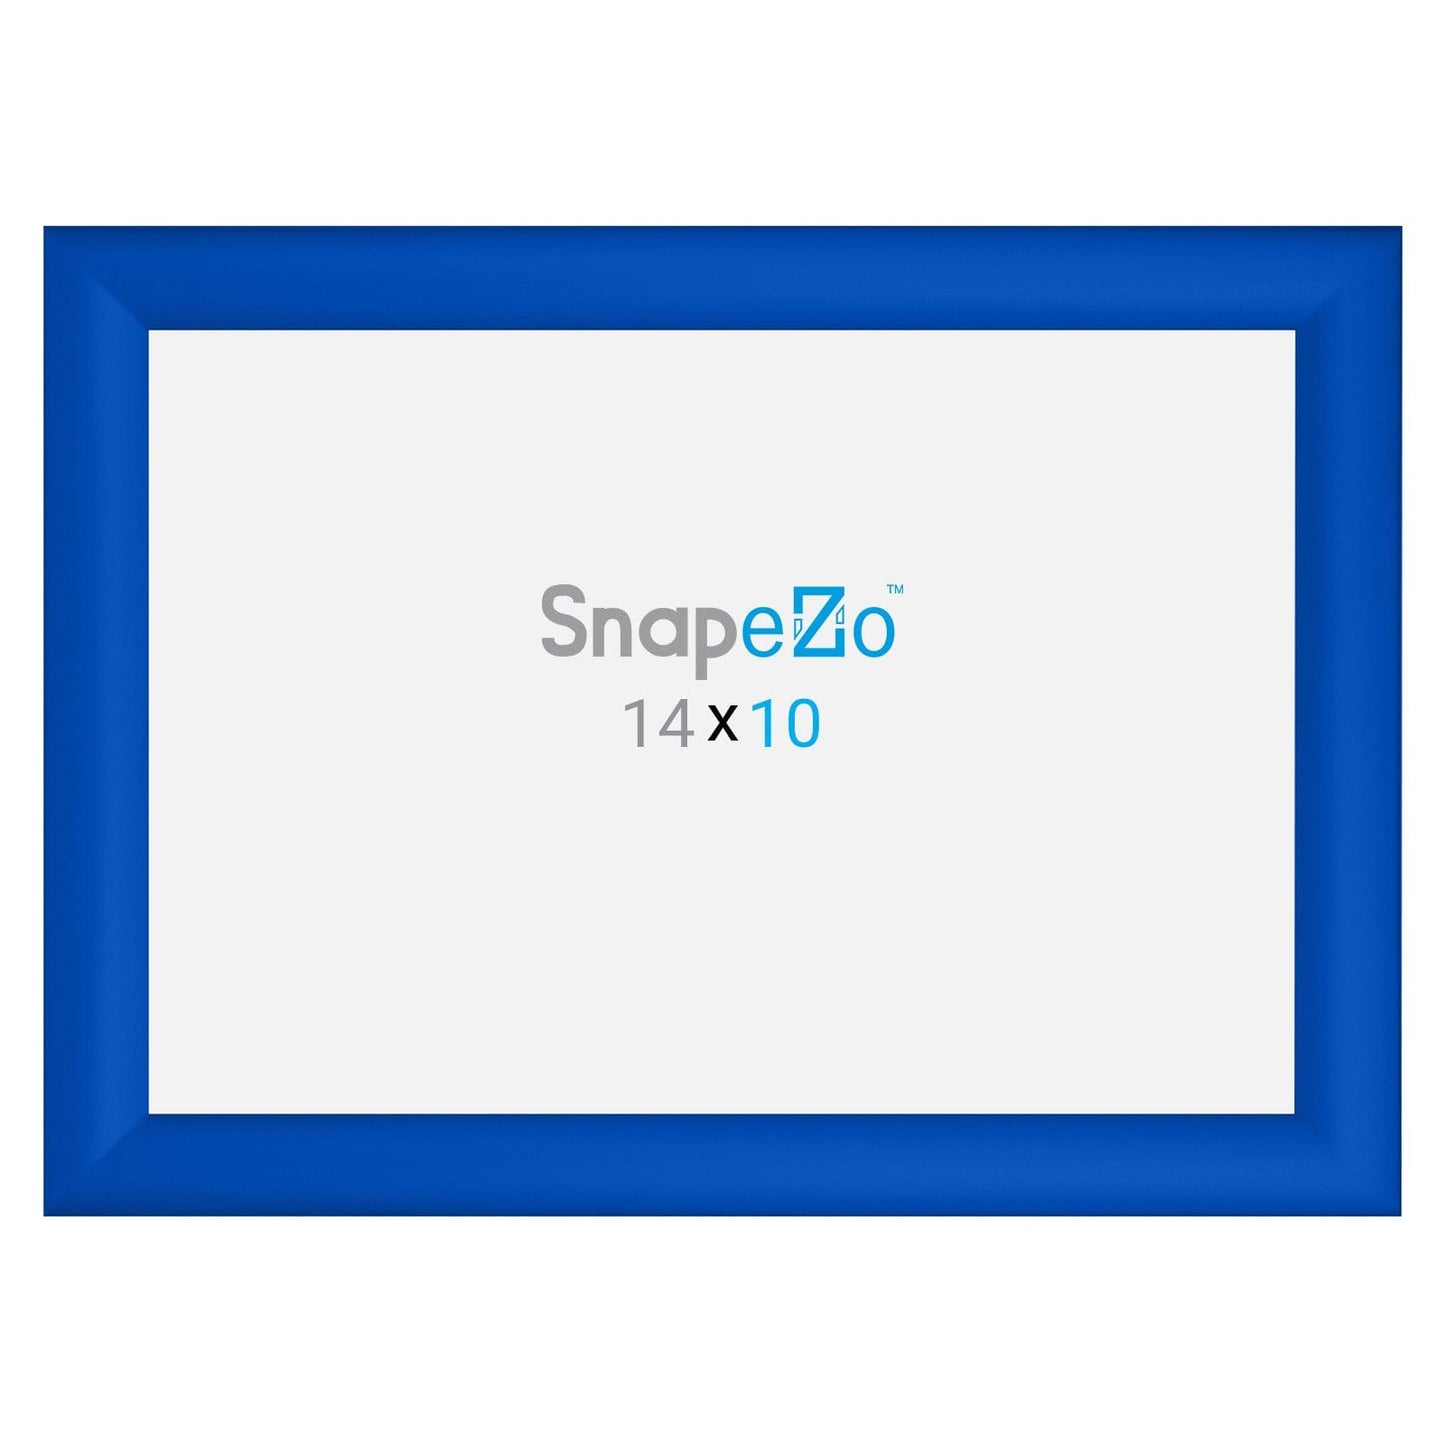 10x14 Blue SnapeZo® Snap Frame - 1.2" Profile - Snap Frames Direct